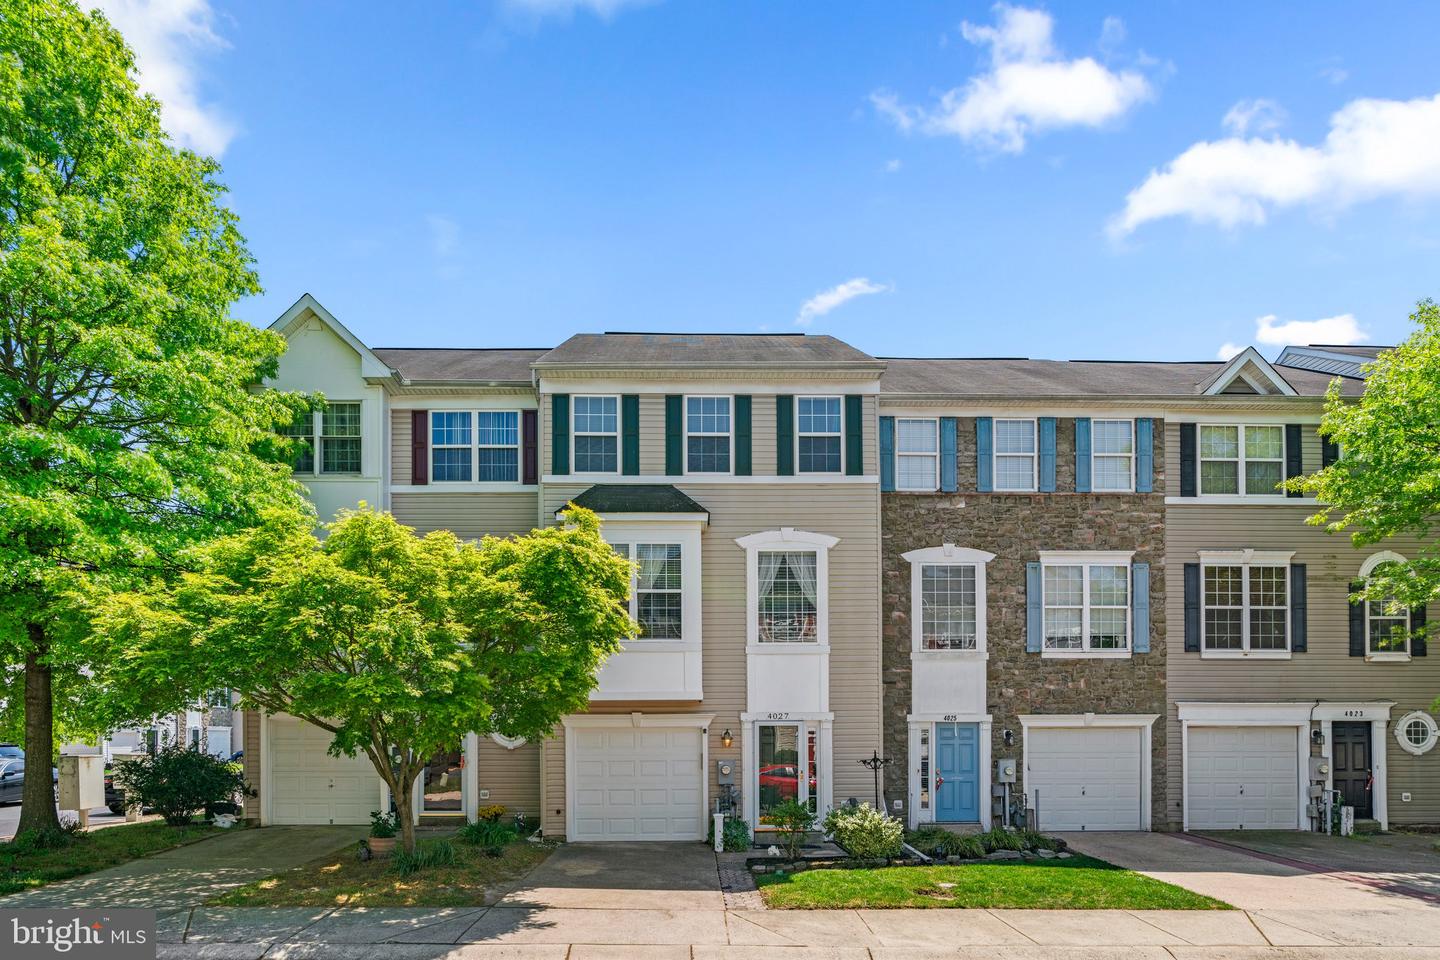 View Pasadena, MD 21122 townhome